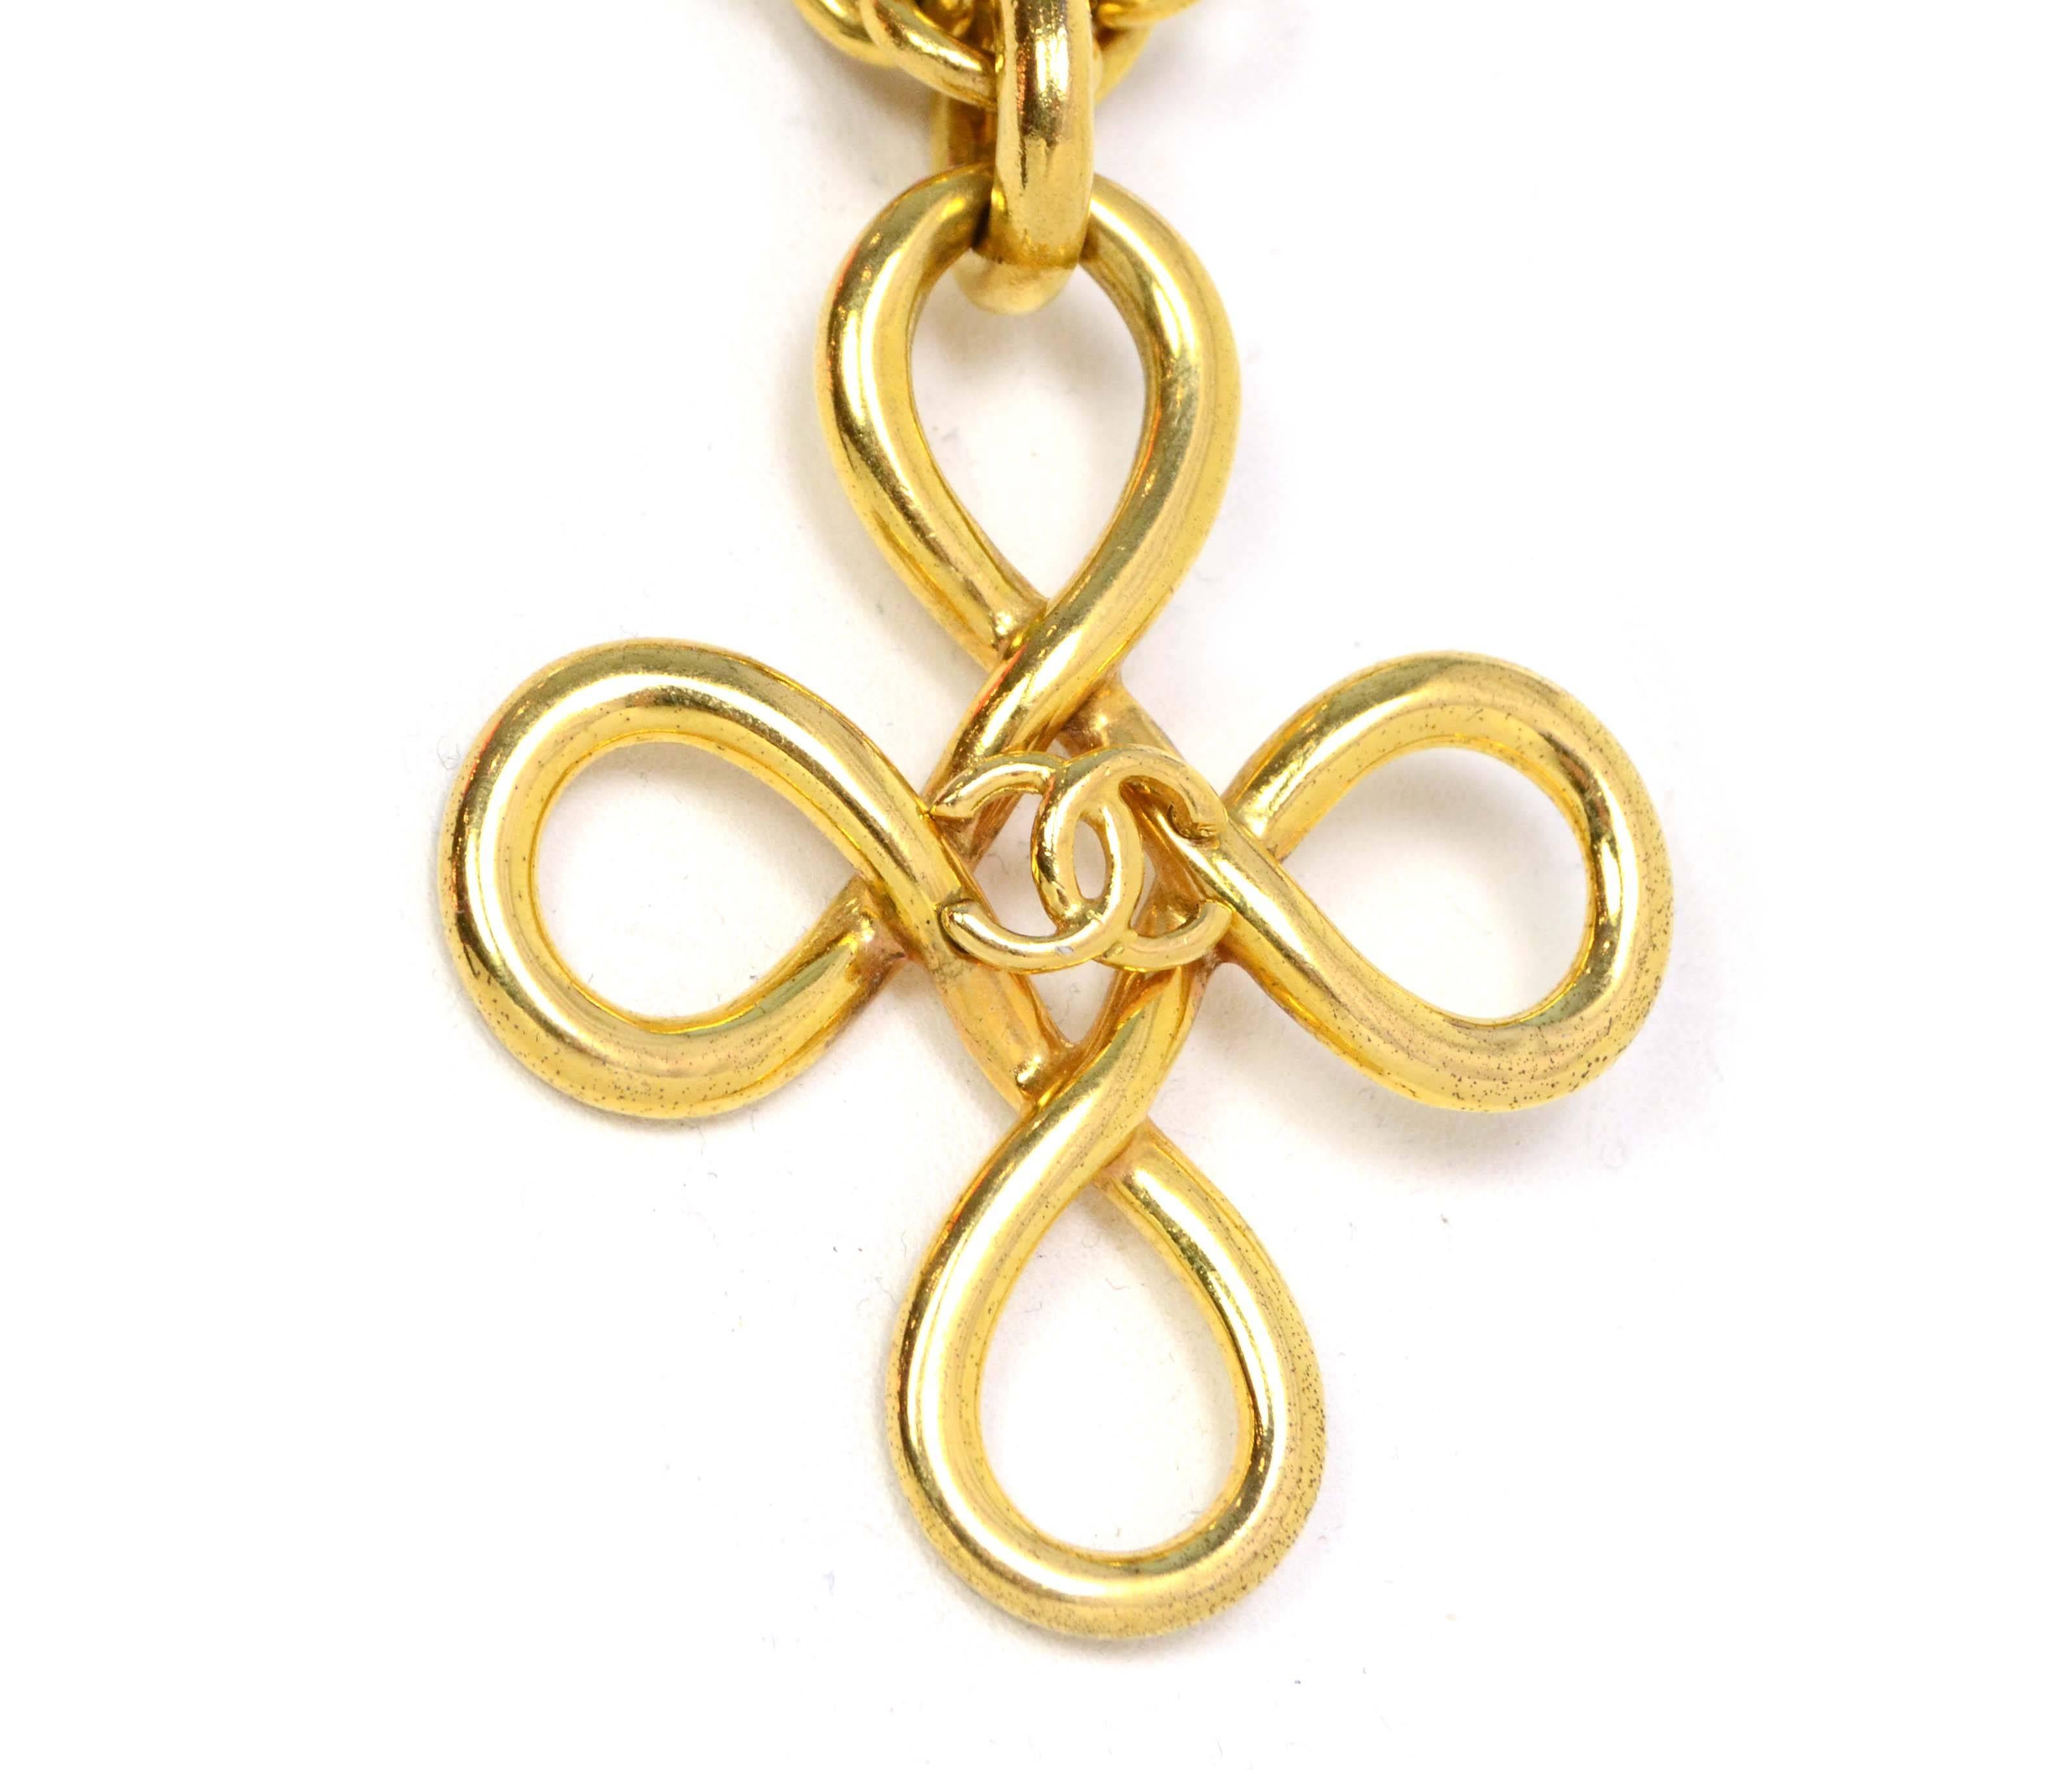 Chanel Vintage '93 Gold Swirl CC Cross Necklace 
Features small CC in center of swirl
Made In: France
Year of Production: 1993
Color: Goldtone
Materials: Metal
Closure: Jump ring closure
Stamp: 93 CC P
Overall Condition: Excellent vintage,